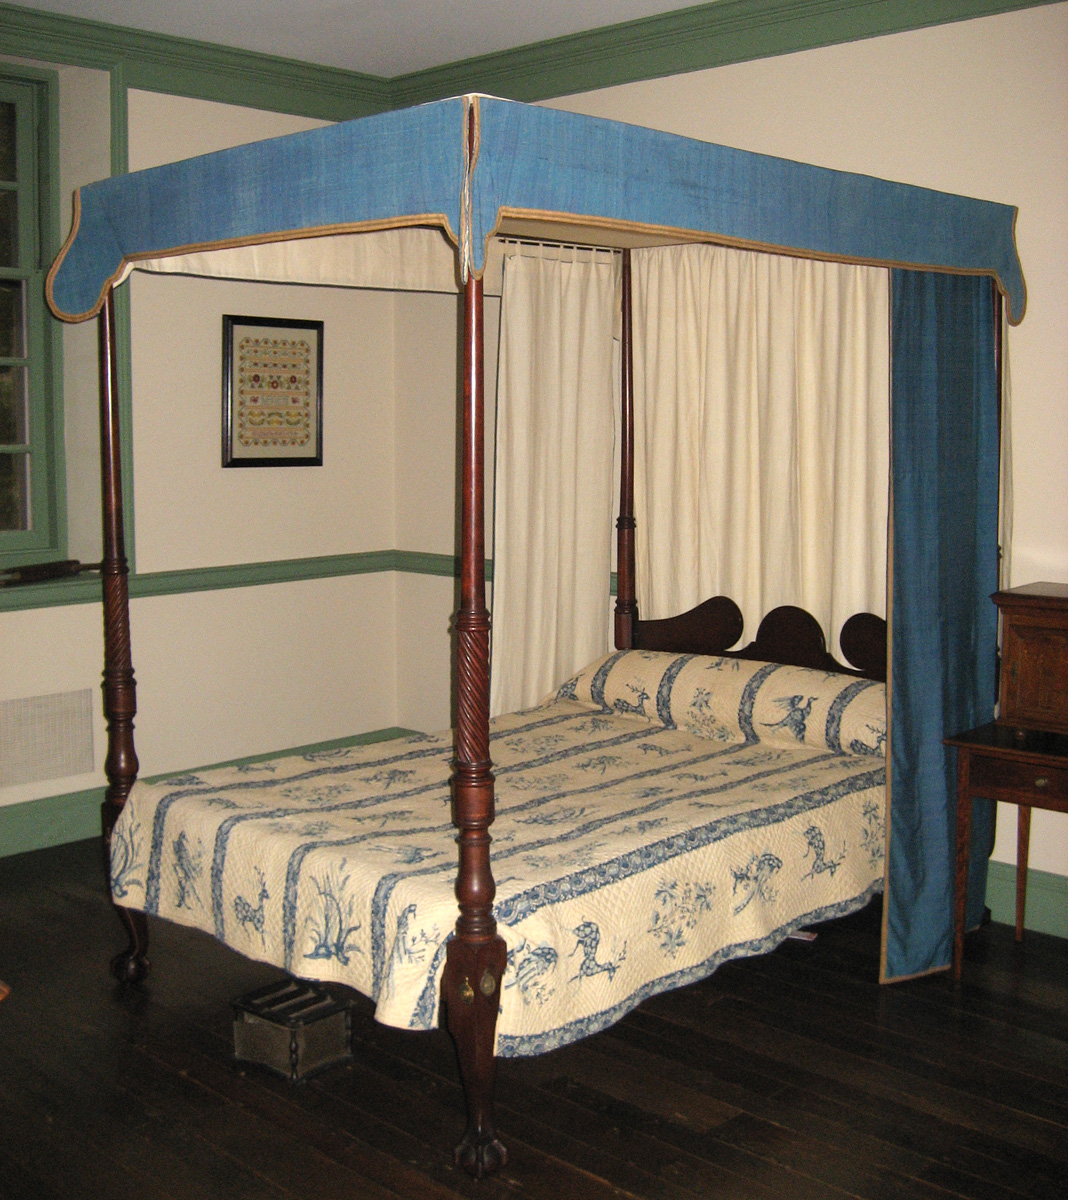 1957.0040.002 bedstead with bed hangings 1964.0512 and quilt 1955.0656 J, K view 1